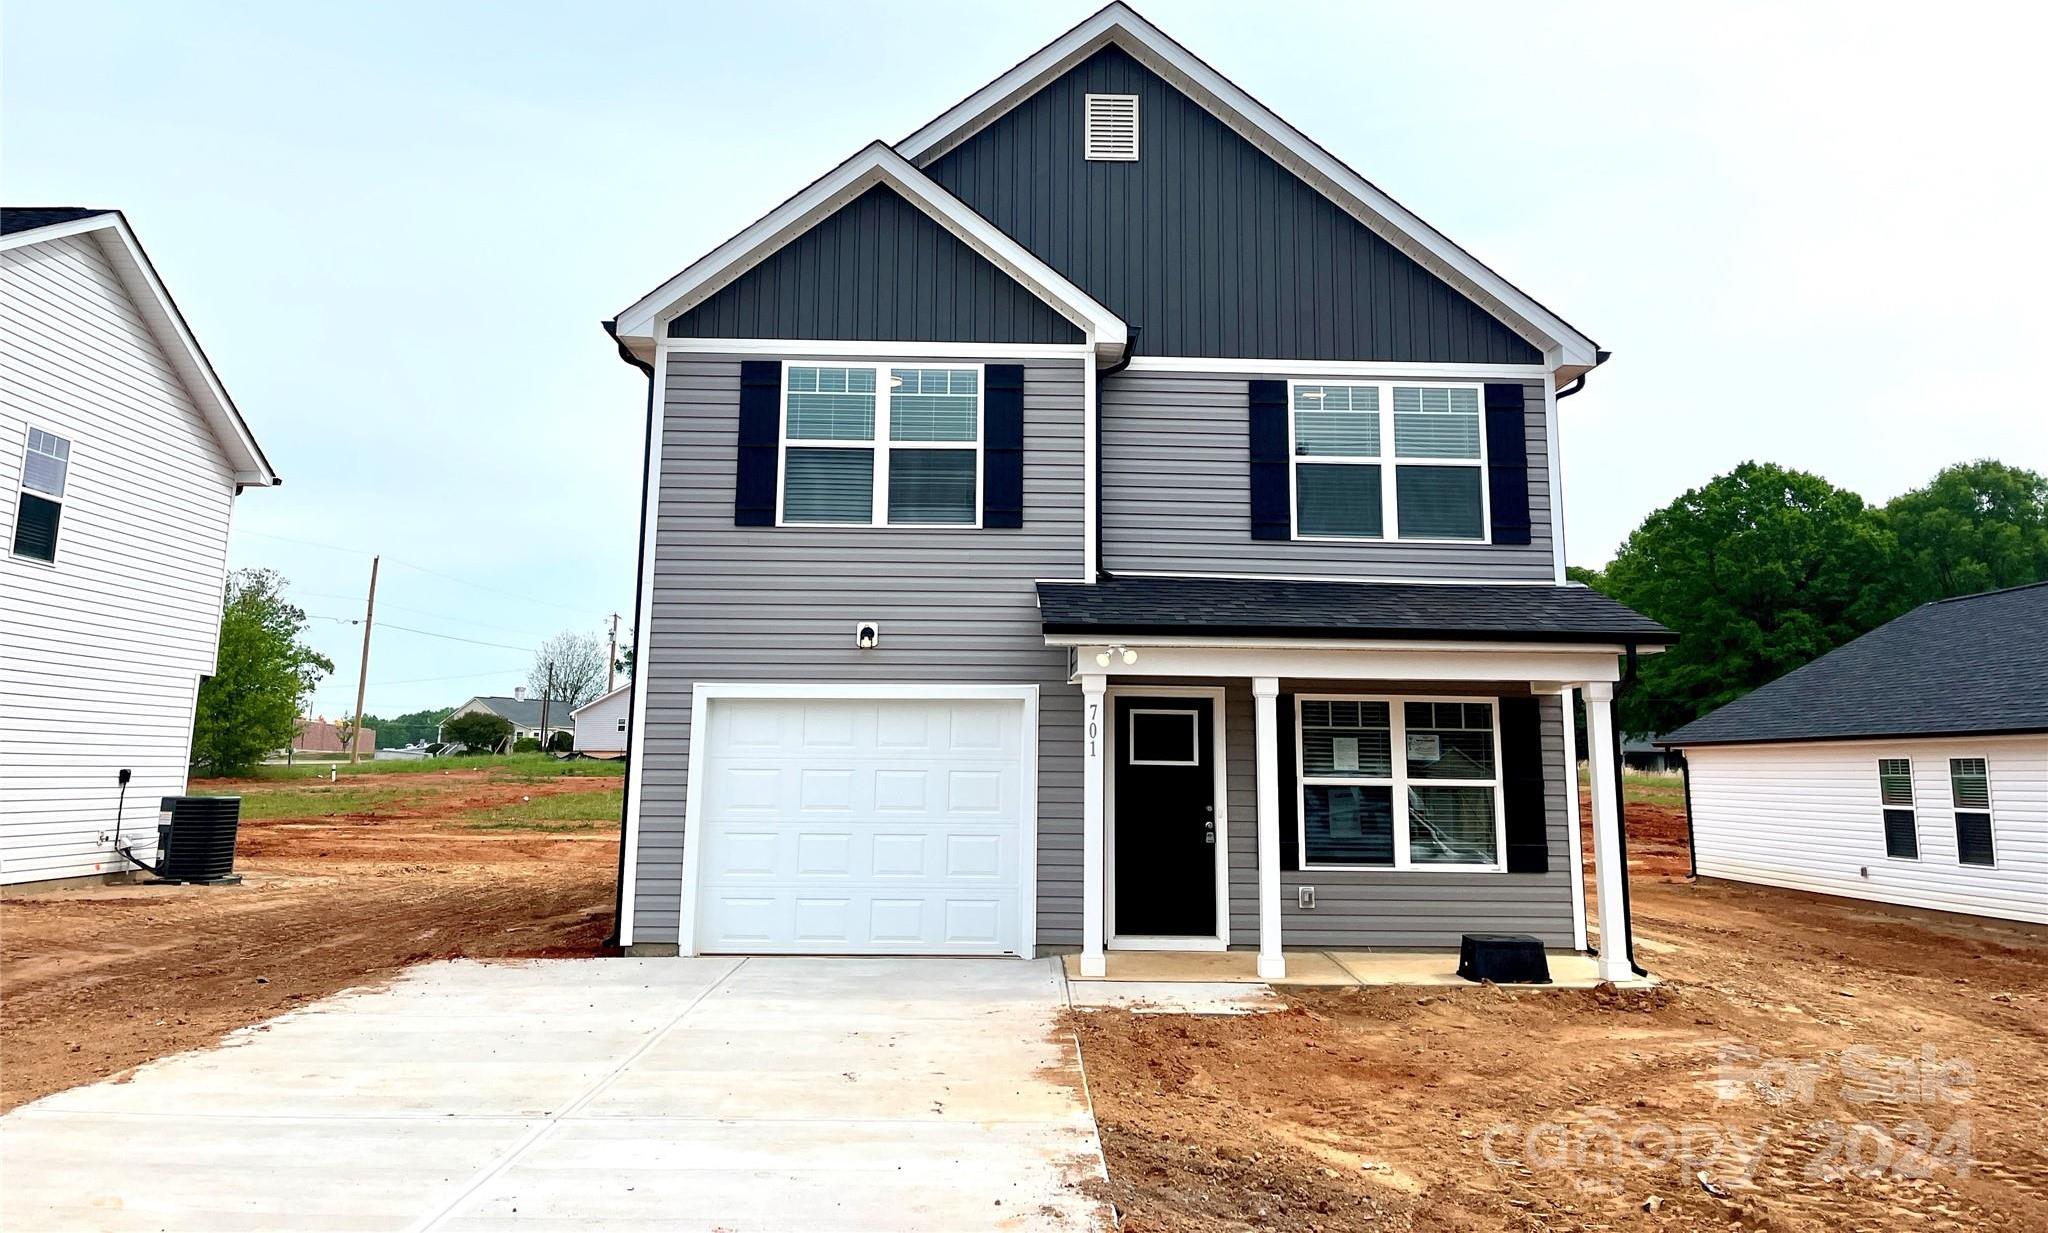 Photo one of 701 3Rd Se St Conover NC 28613 | MLS 4130375